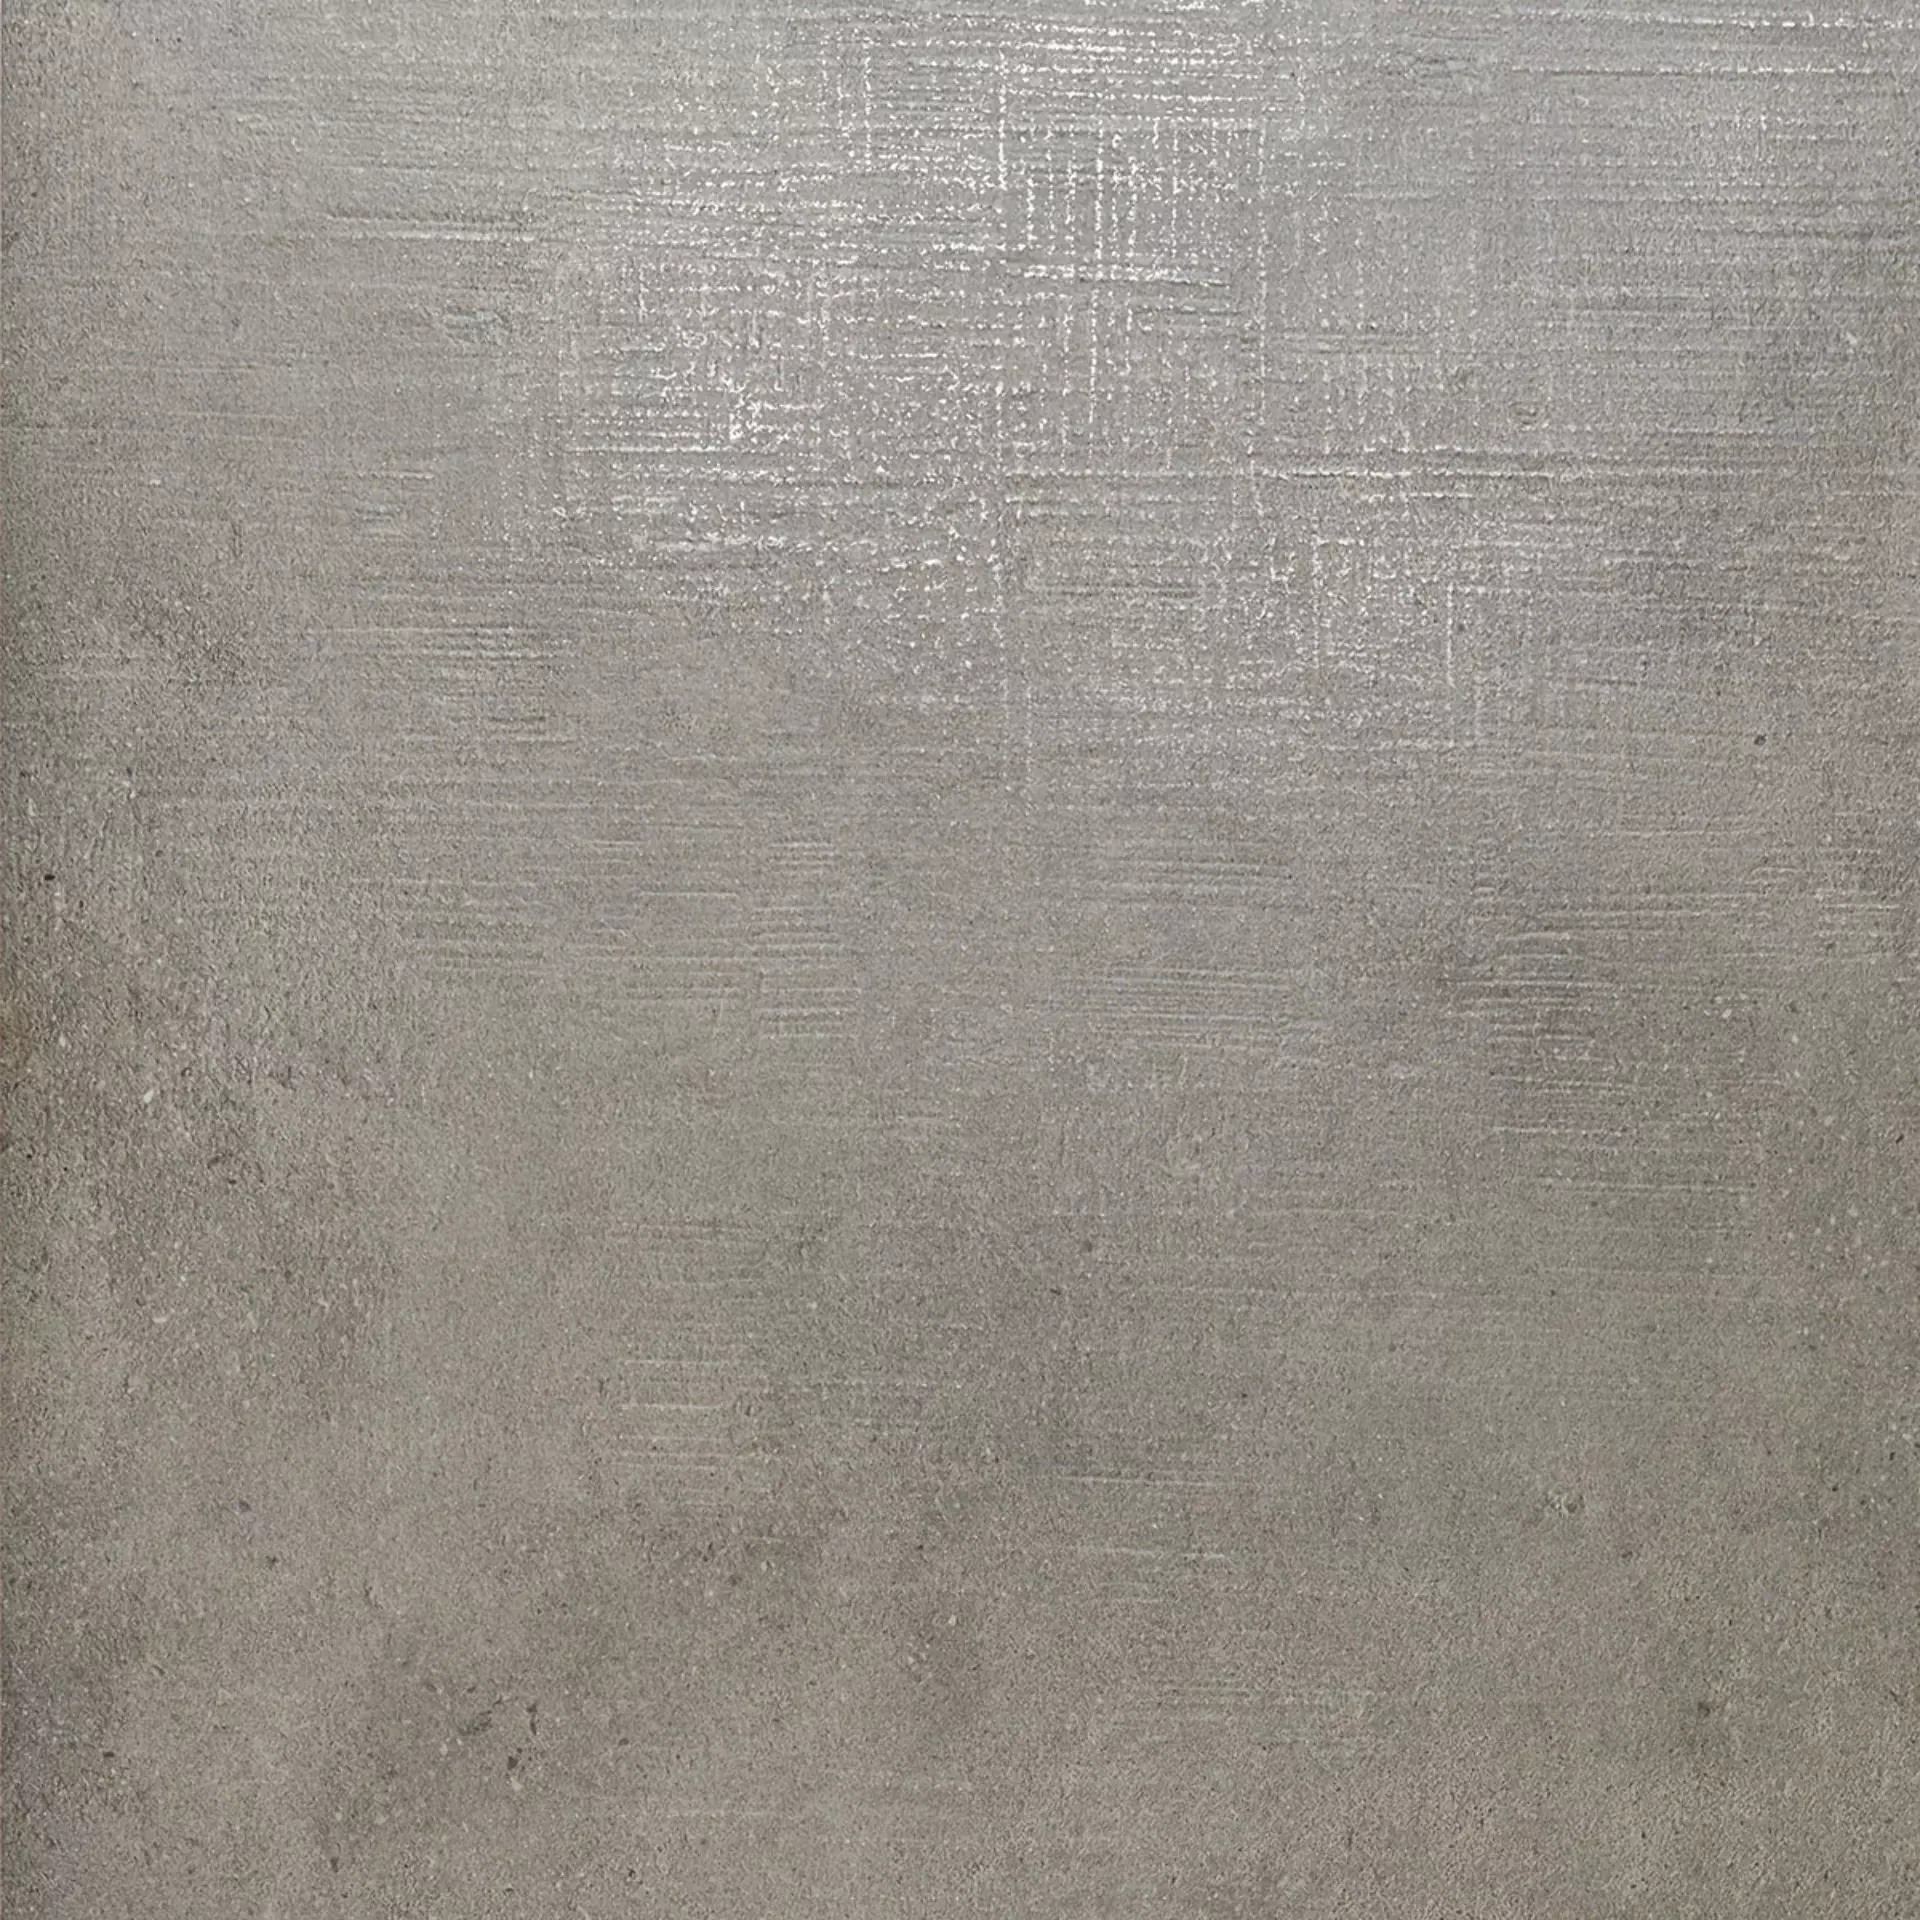 Rondine Loft Taupe Lappato J89135 80x80cm rectified 8,5mm